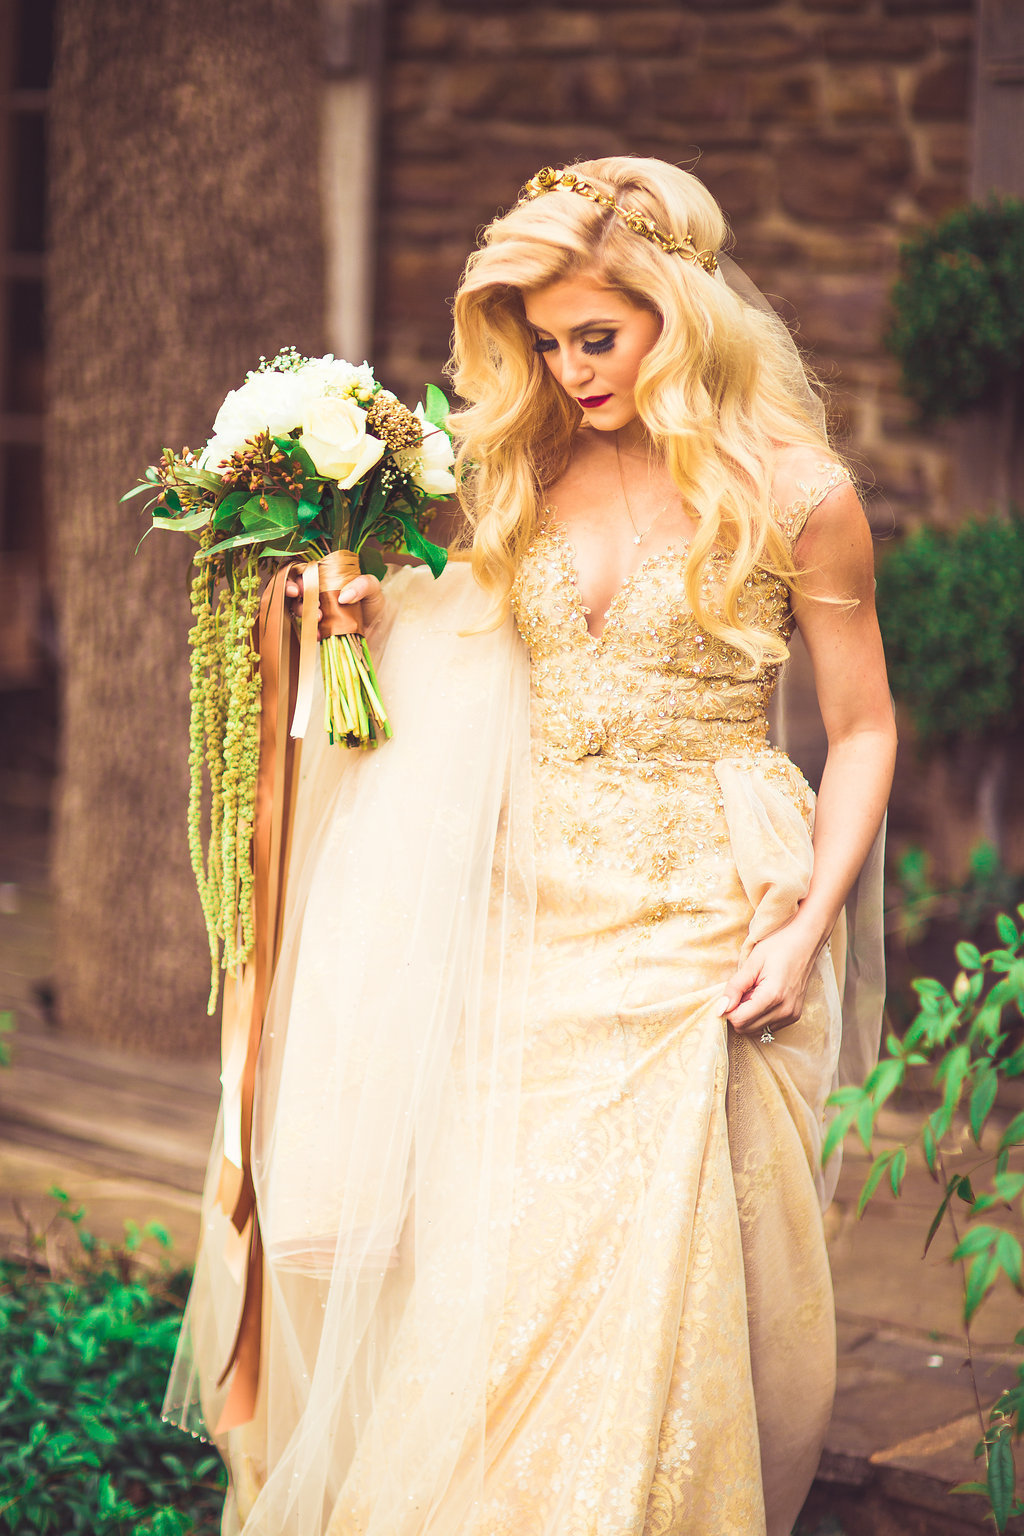 Wedding Photograph Of Bride Holding Her Bouquet and Dress Los Angeles